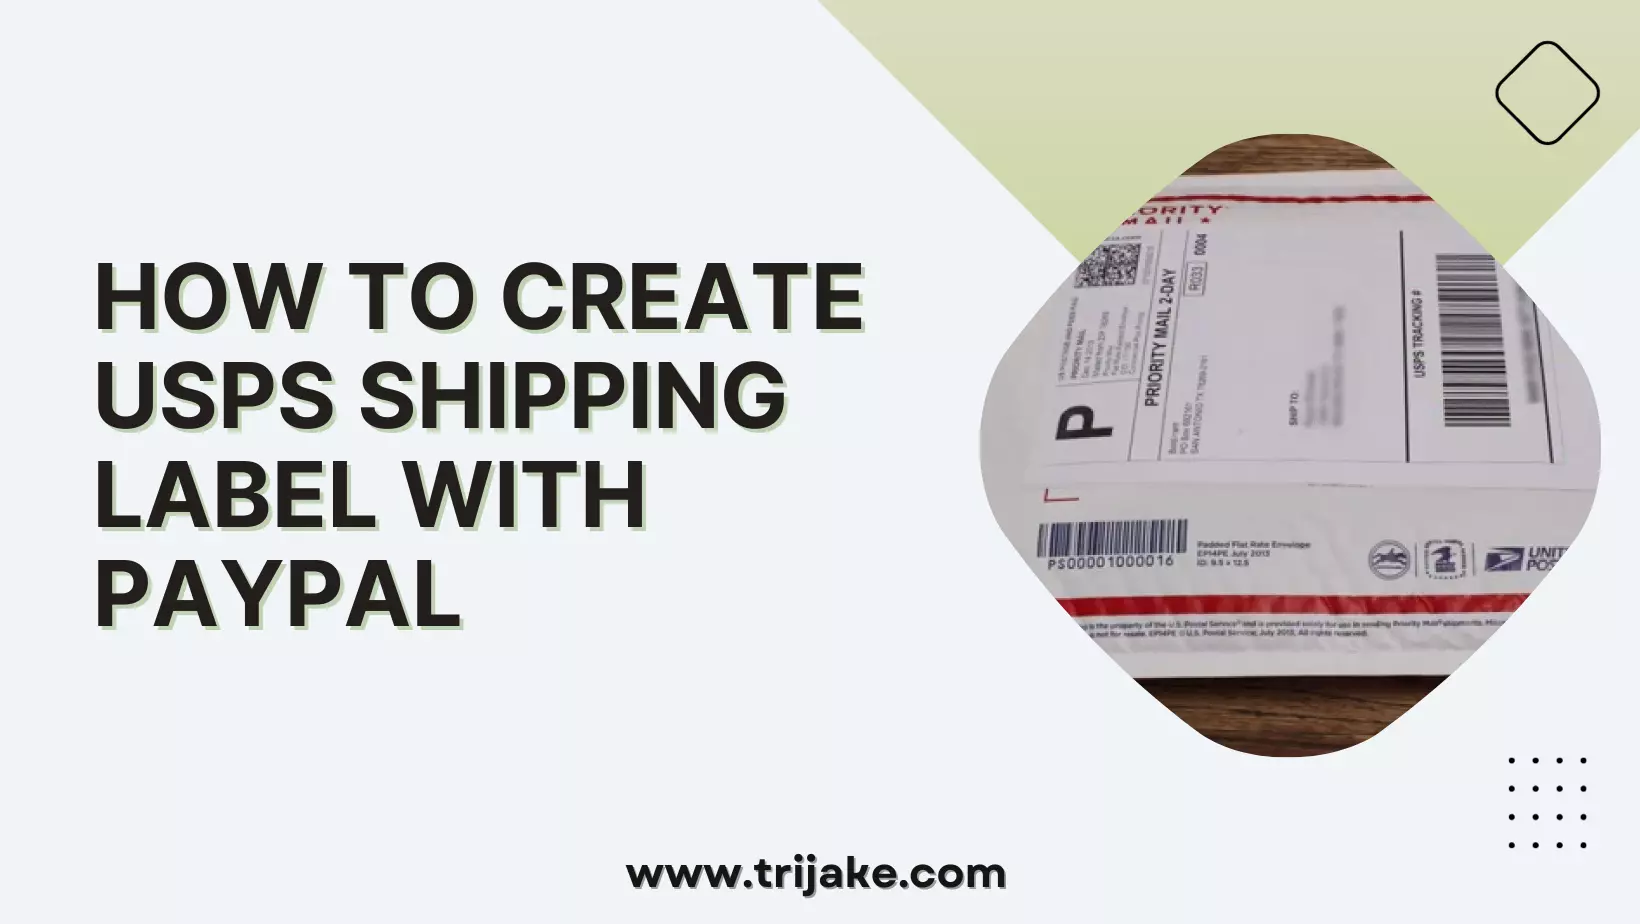 Create USPS Shipping Label